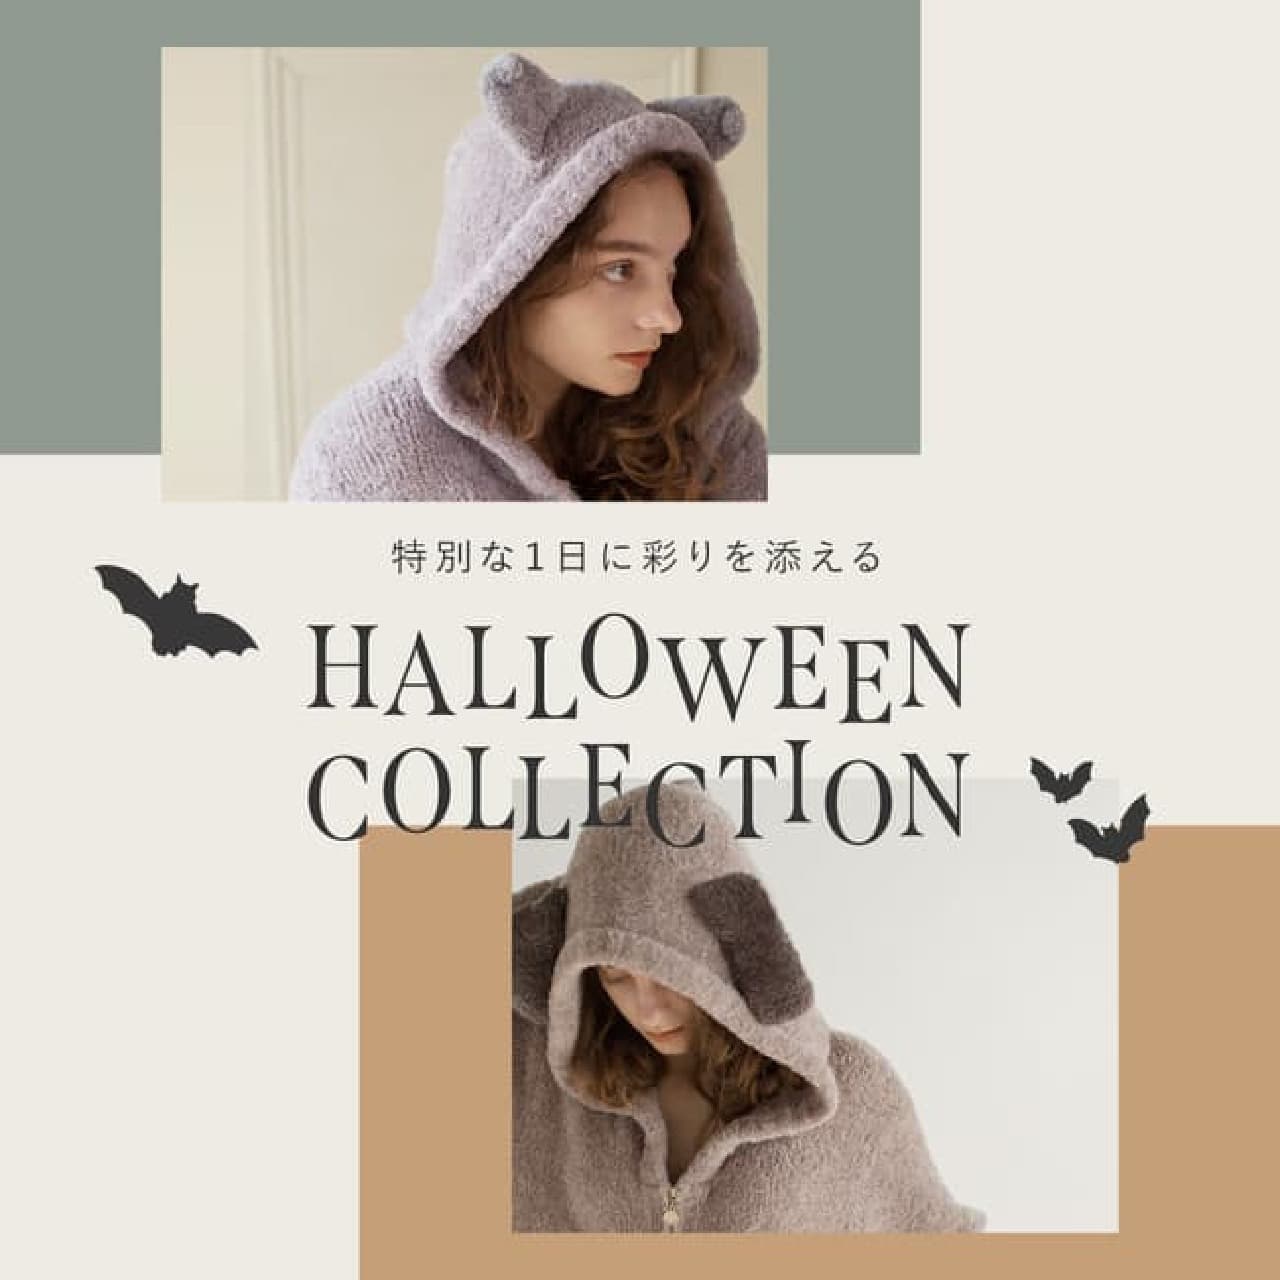 Halloween collection of SNIDEL HOME --Animal hoodies, socks with paws, etc.